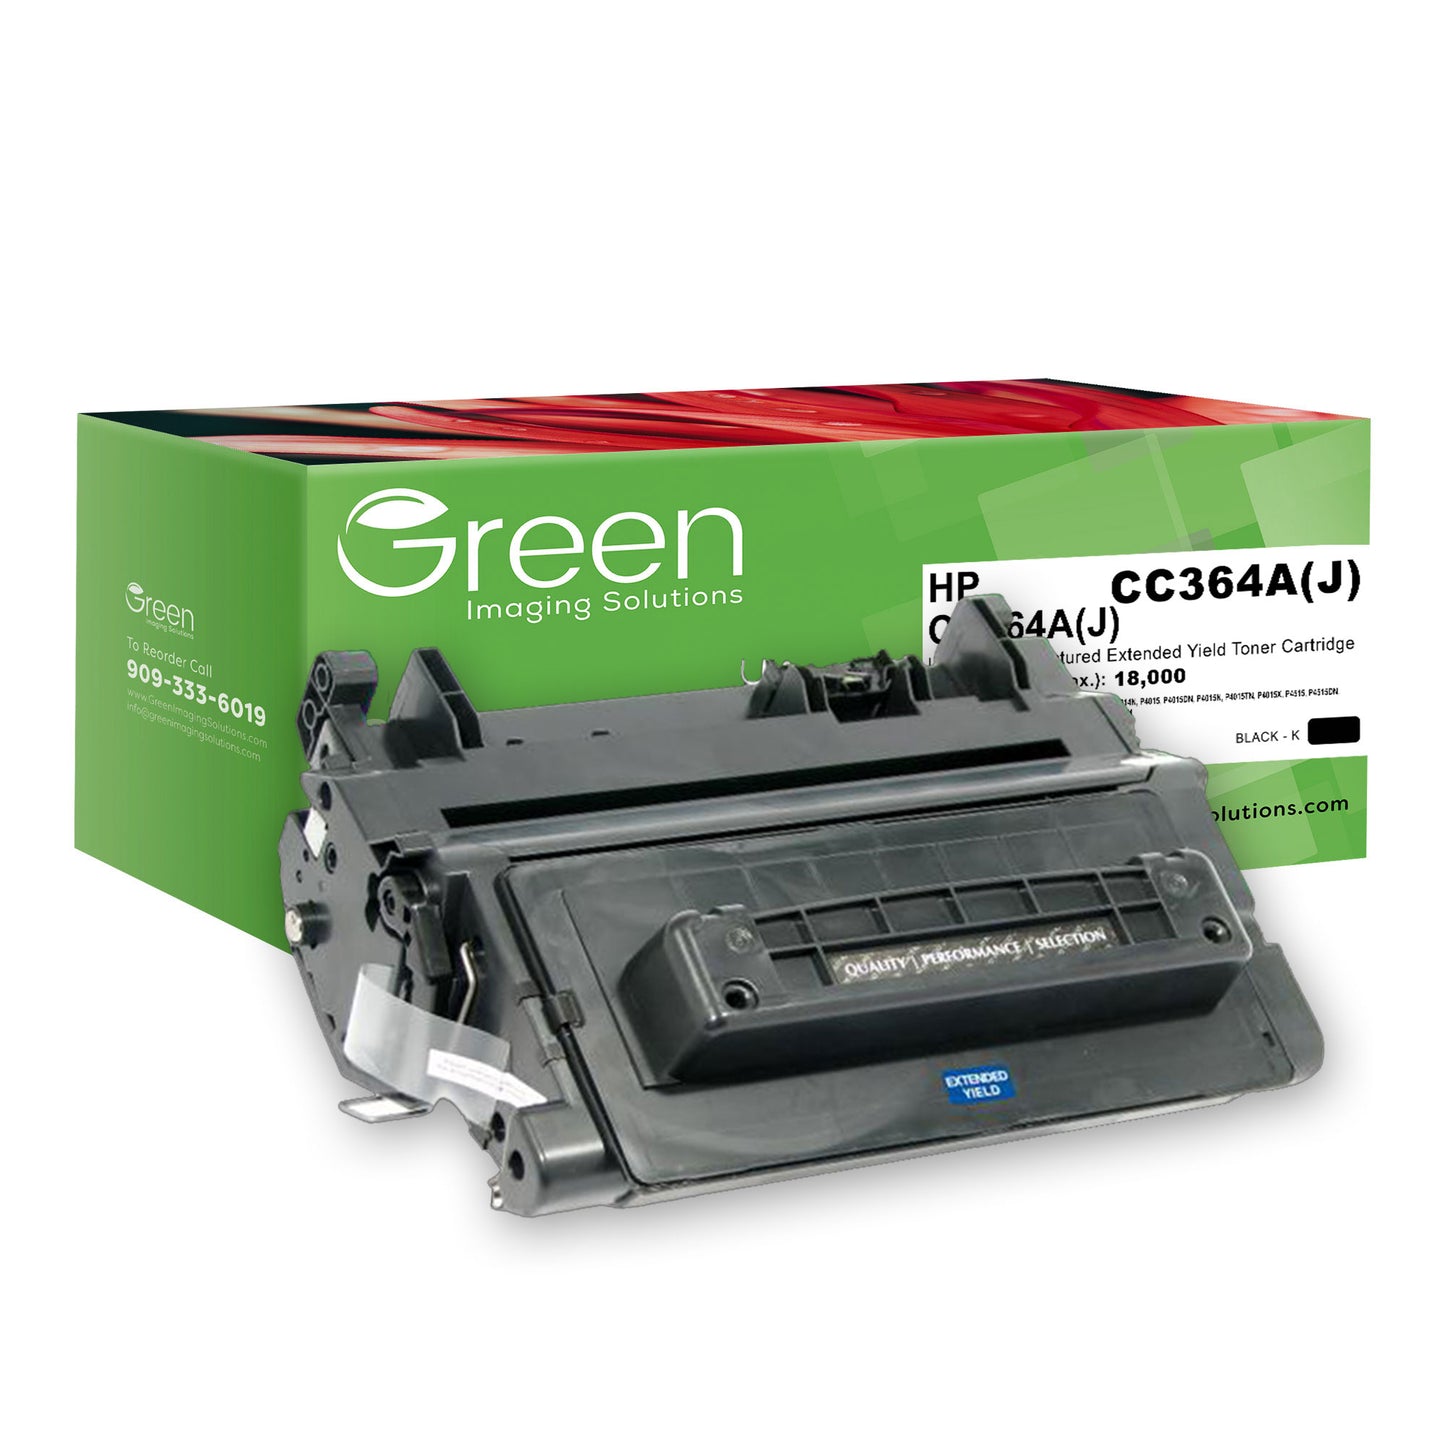 GIS USA Remanufactured Extended Yield Toner Cartridge for HP CC364A